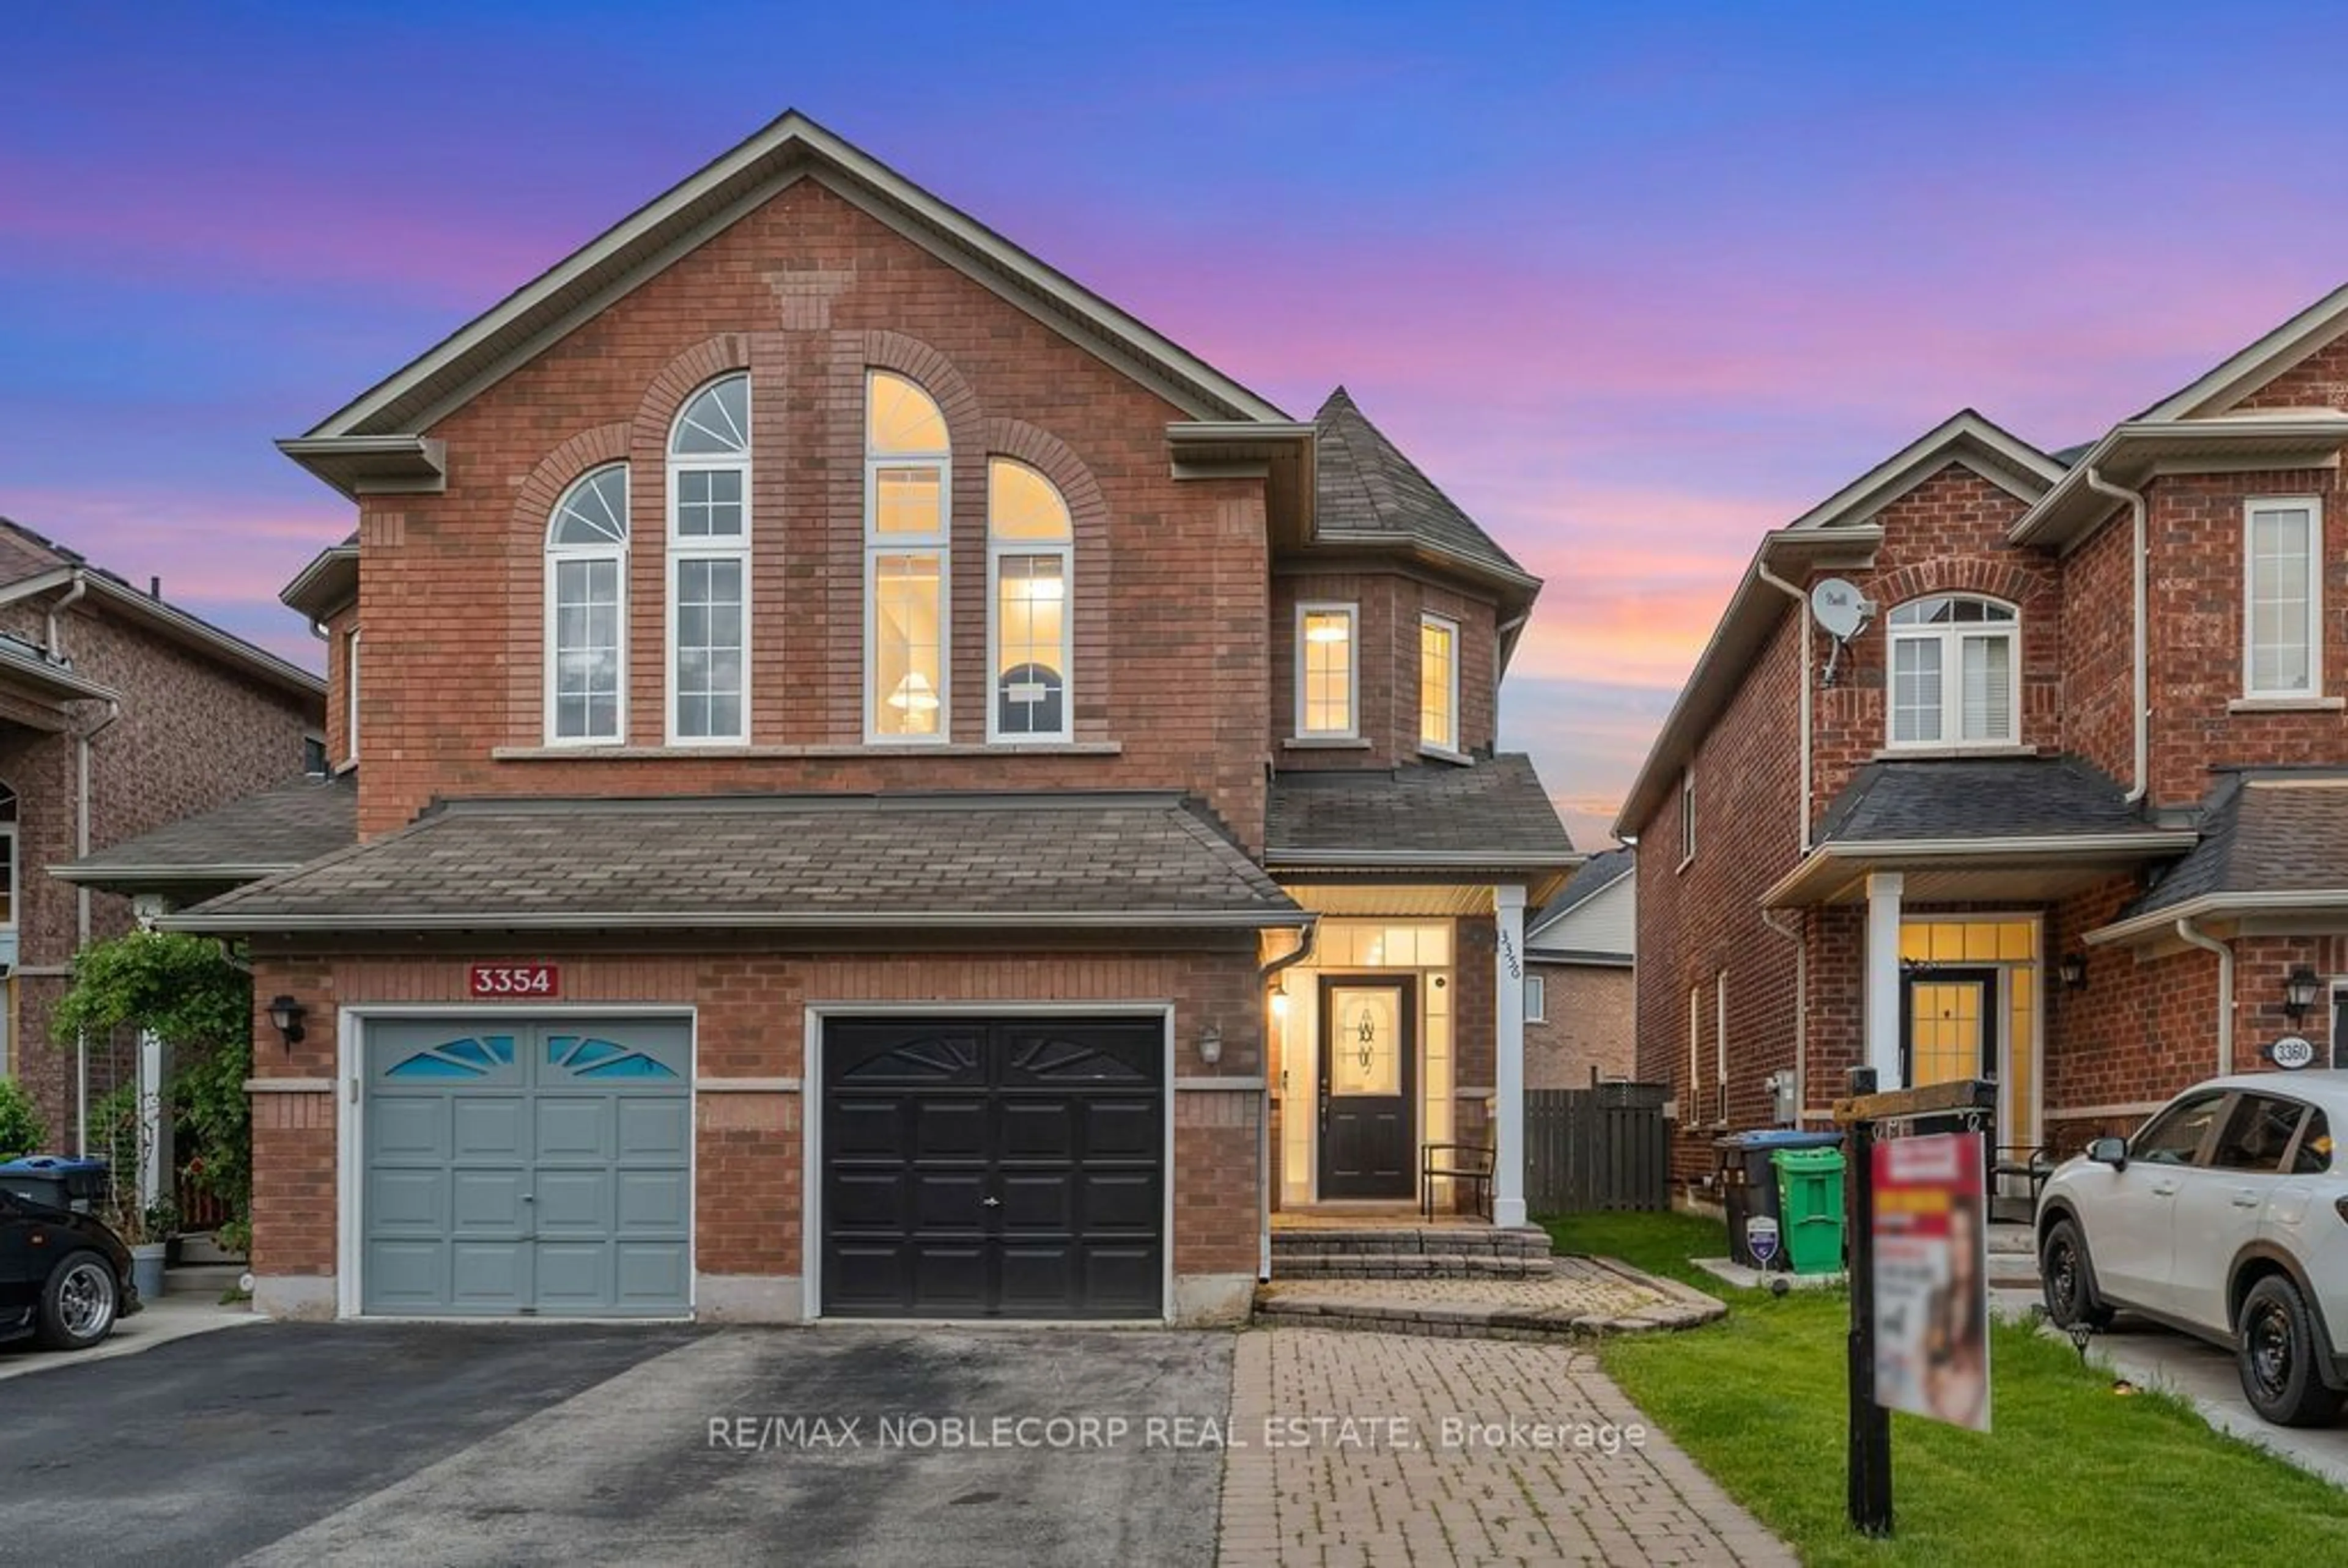 Home with brick exterior material for 3356 Fountain Park Ave, Mississauga Ontario L5M 7E2